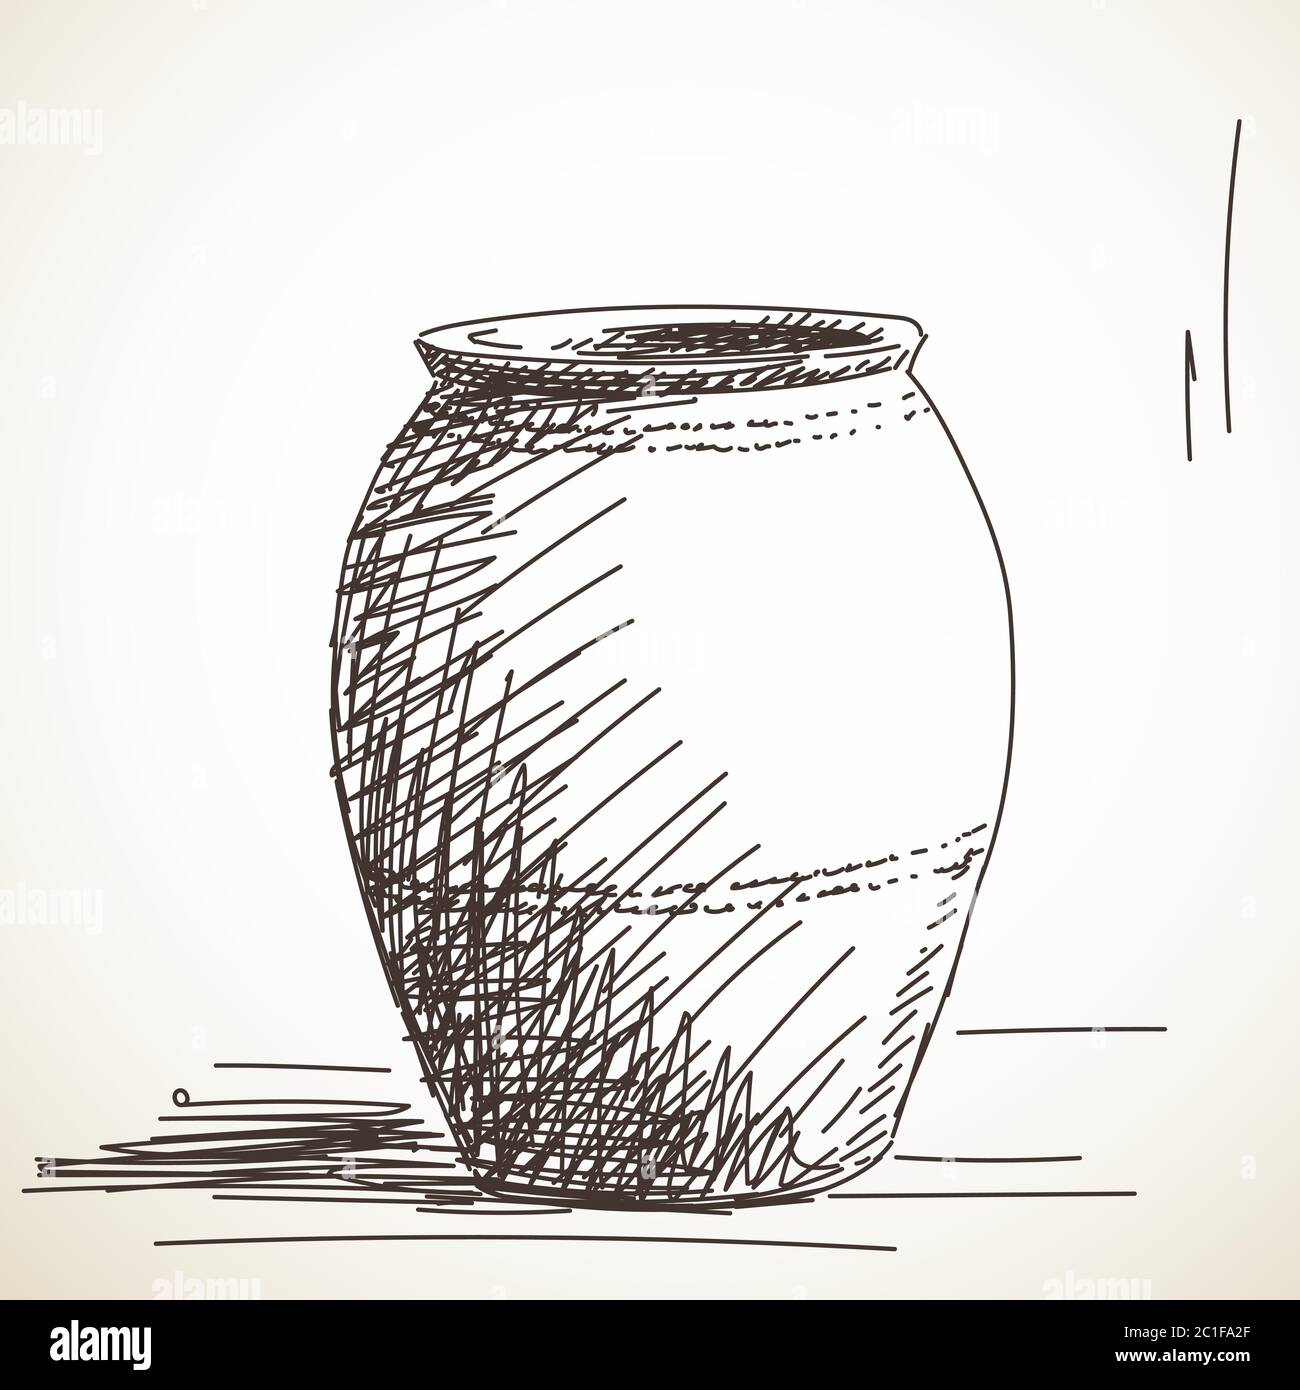 Pottery Drawing Images  Free Download on Freepik